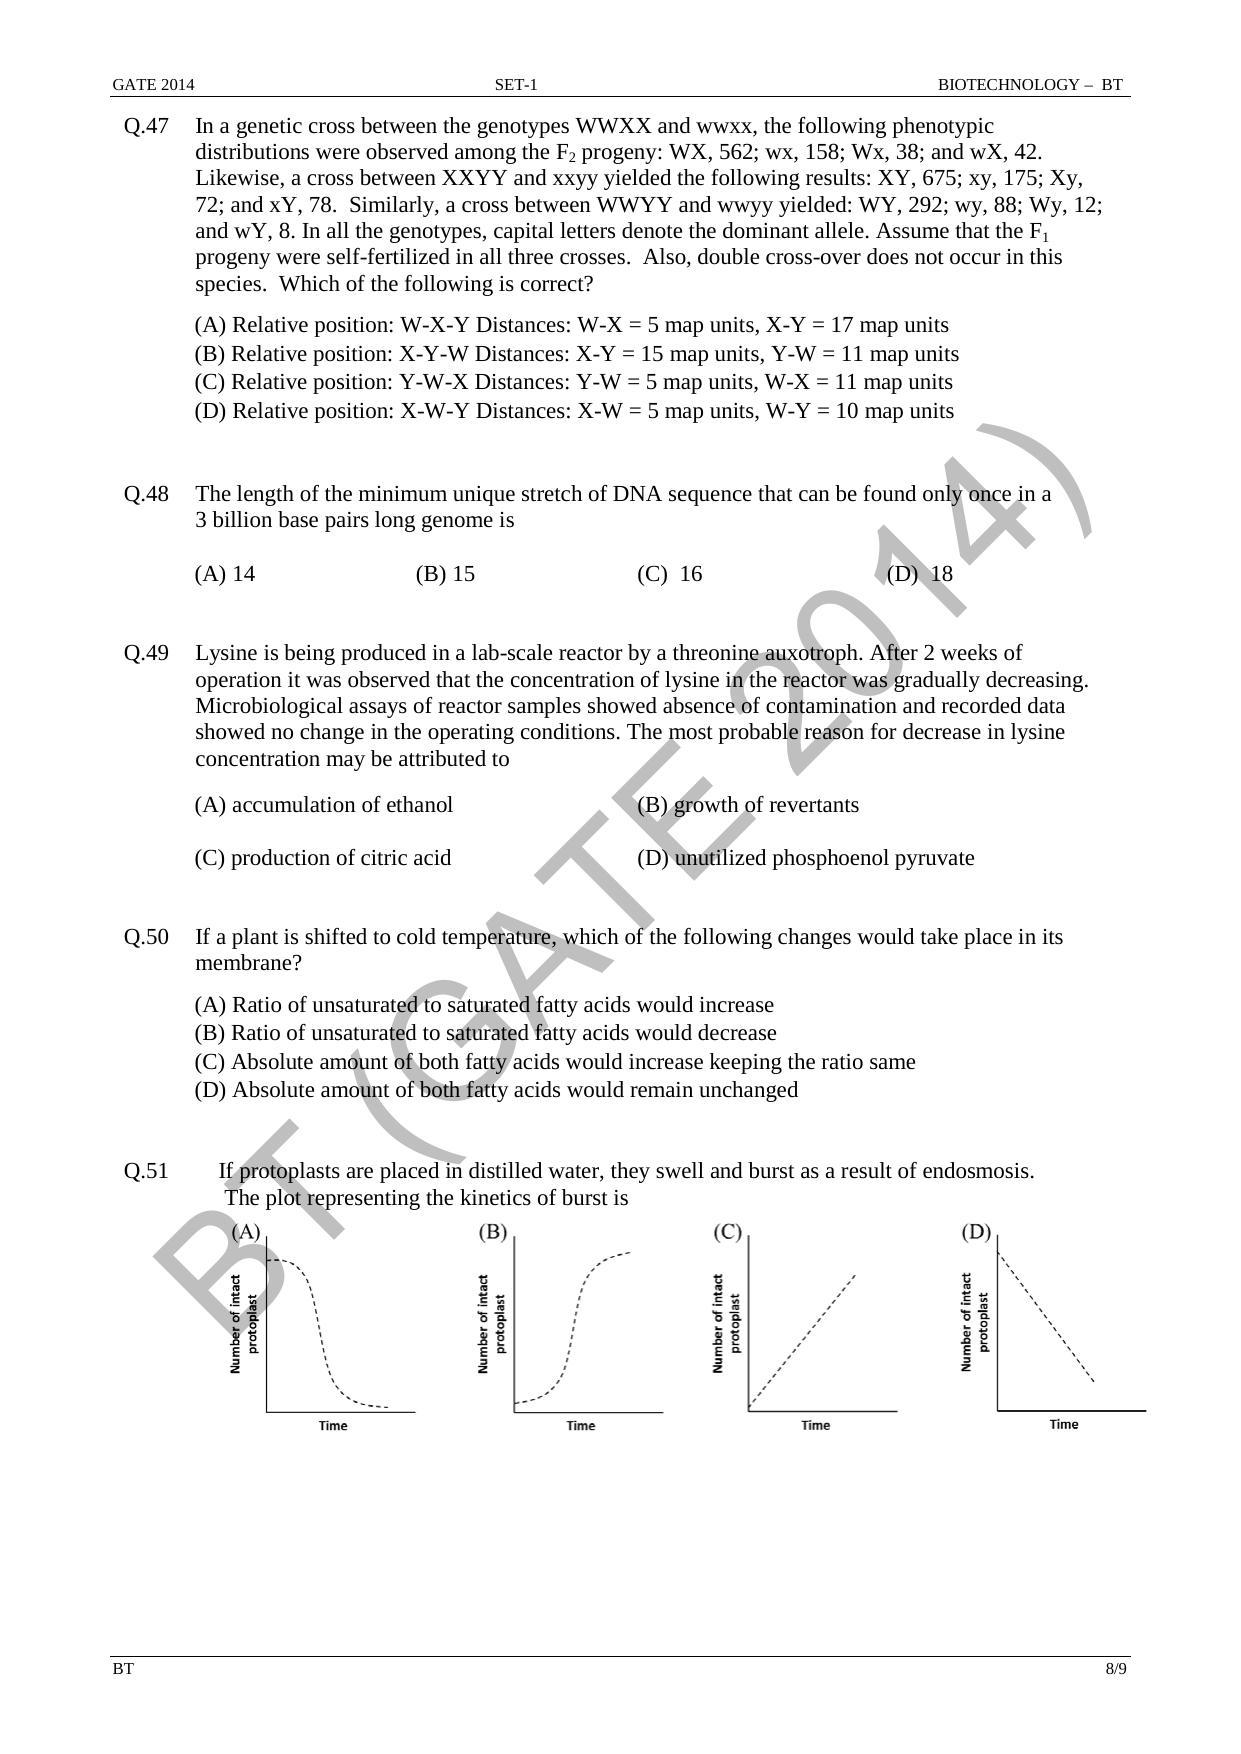 GATE 2014 Biotechnology (BT) Question Paper with Answer Key - Page 14